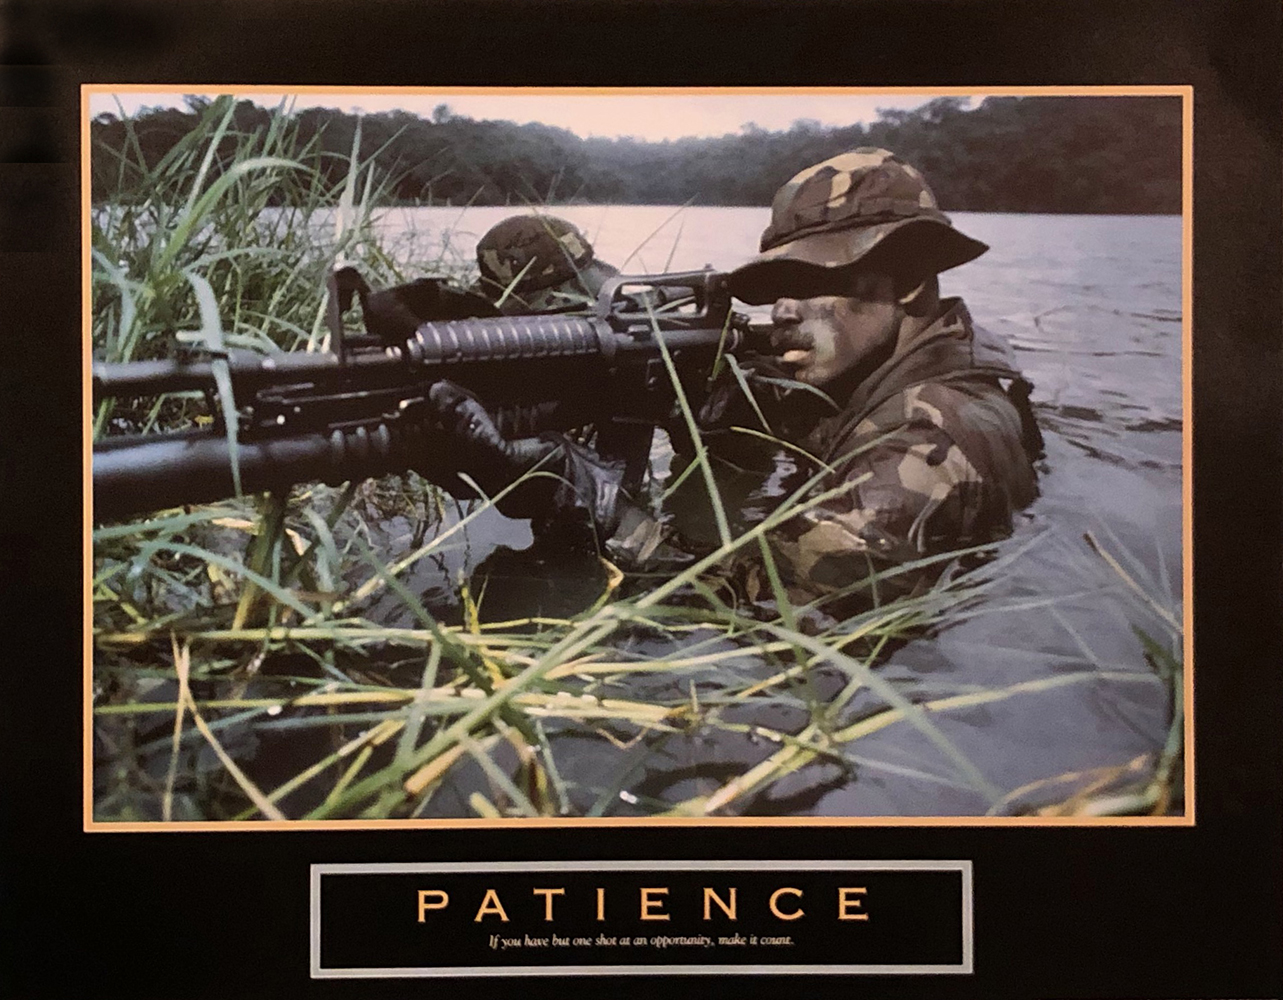 Patience - Soldier